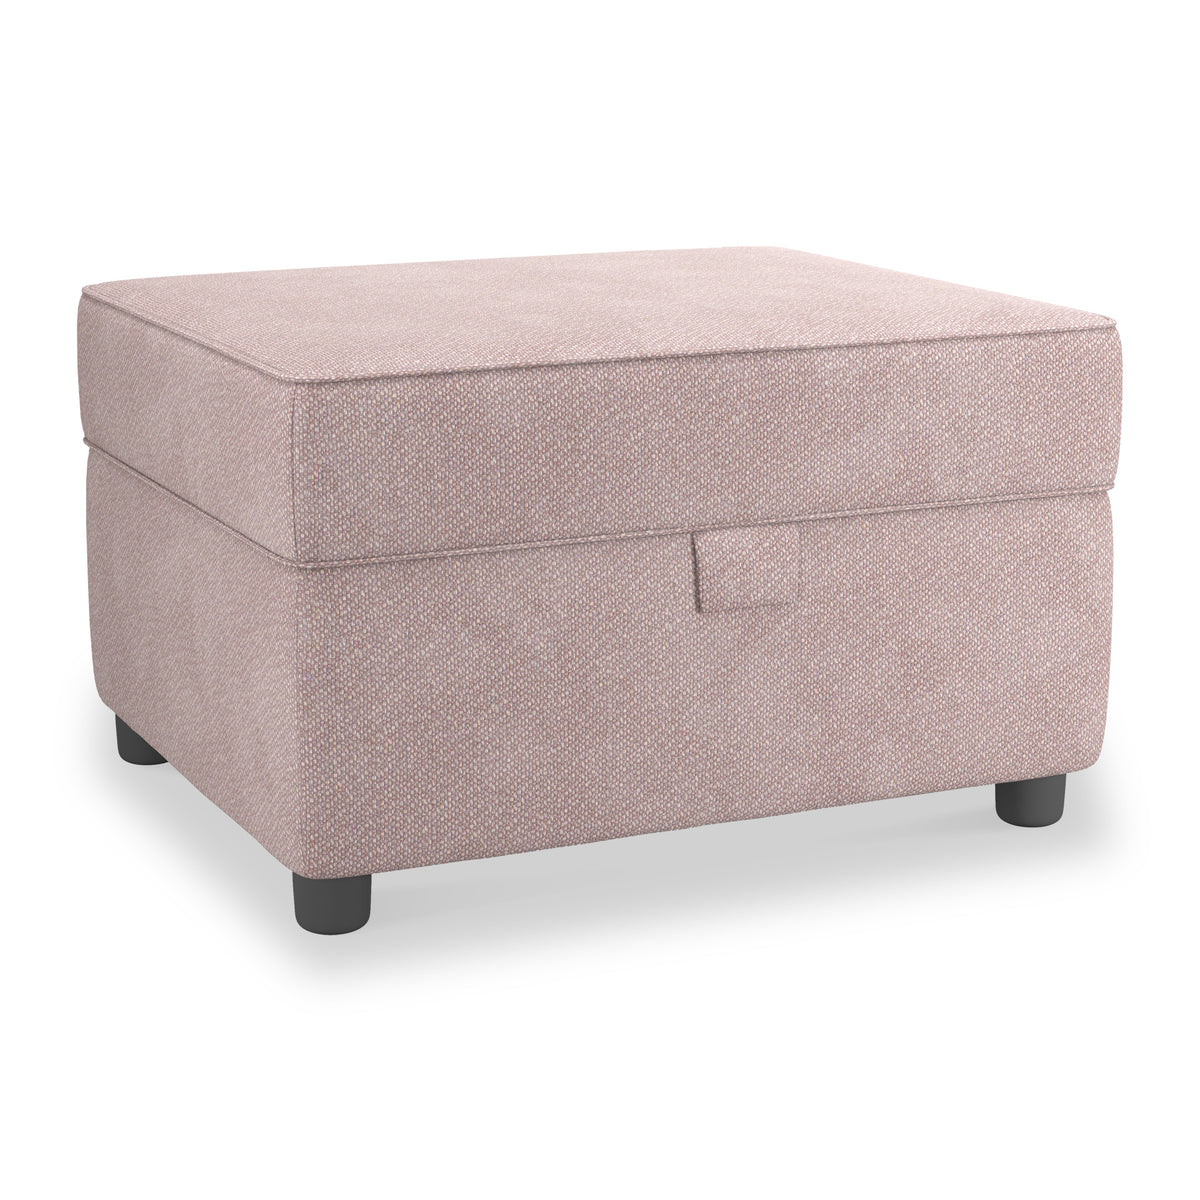 Harry Mauve Small Storage Footstool from Roseland Furniture